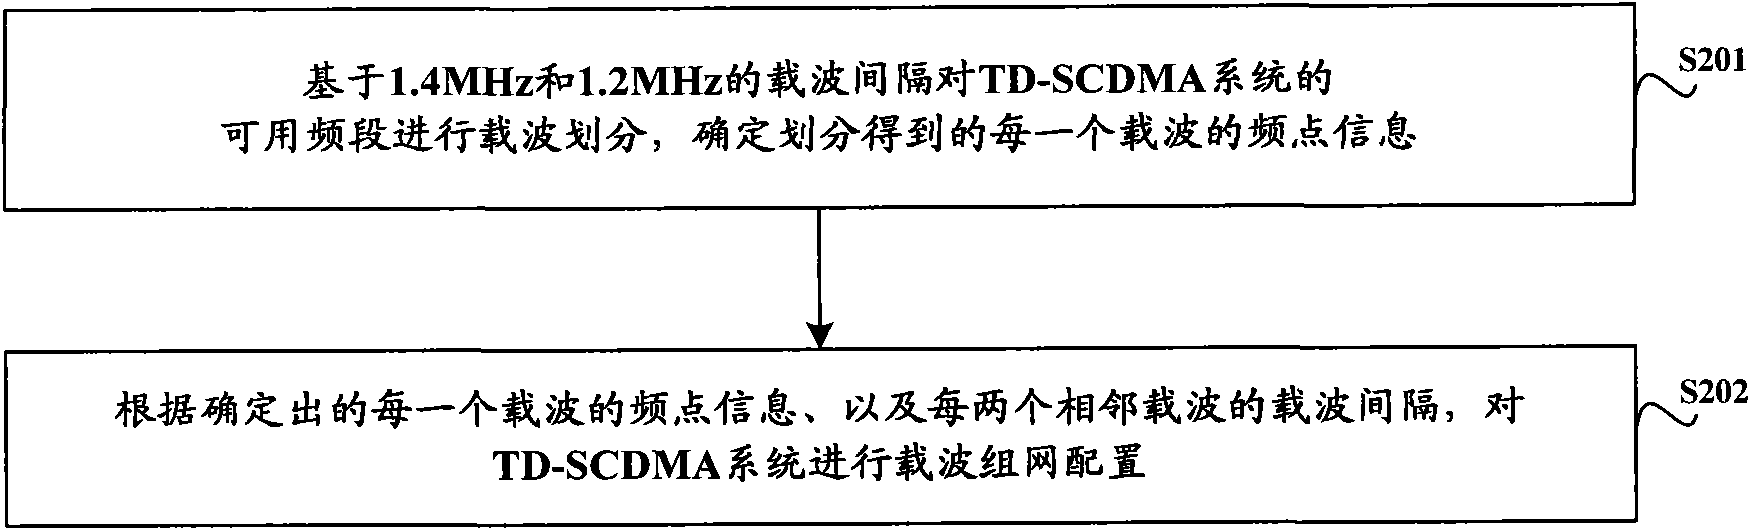 Carrier wave networking configuration method and system for time division-synchronization code division multiple access (TD-SCDMA)